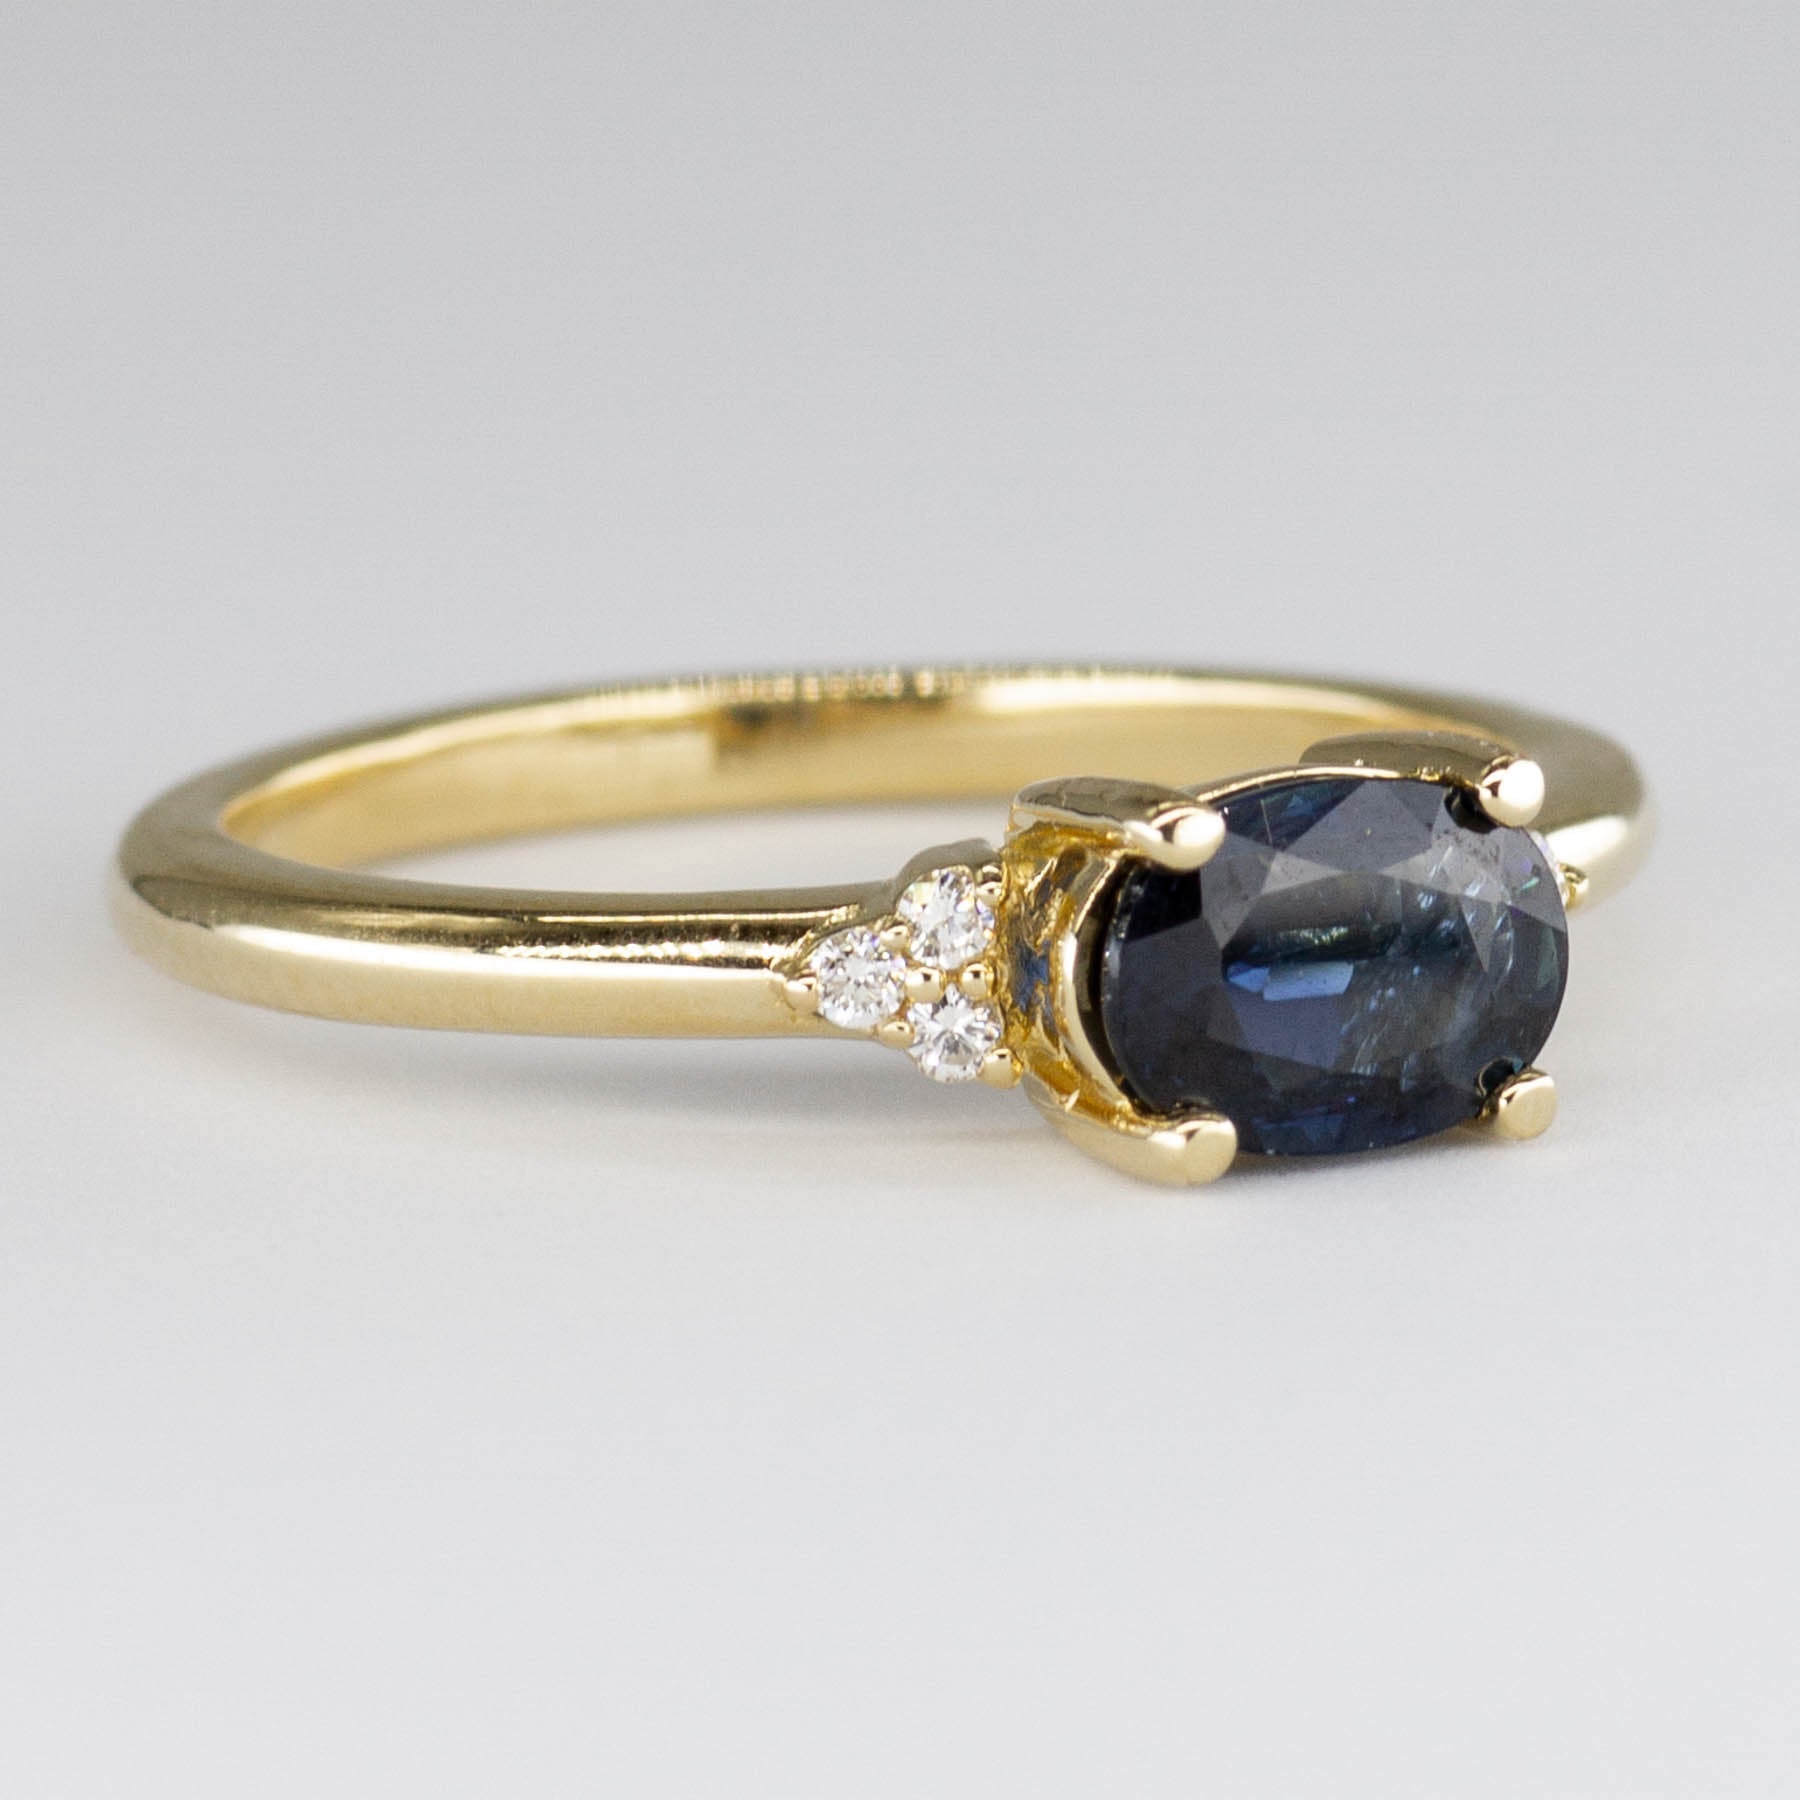 '100 Ways' 14k Yellow Gold East West Sapphire and Diamond Ring | 0.80ct | SZ 7 - 100 Ways